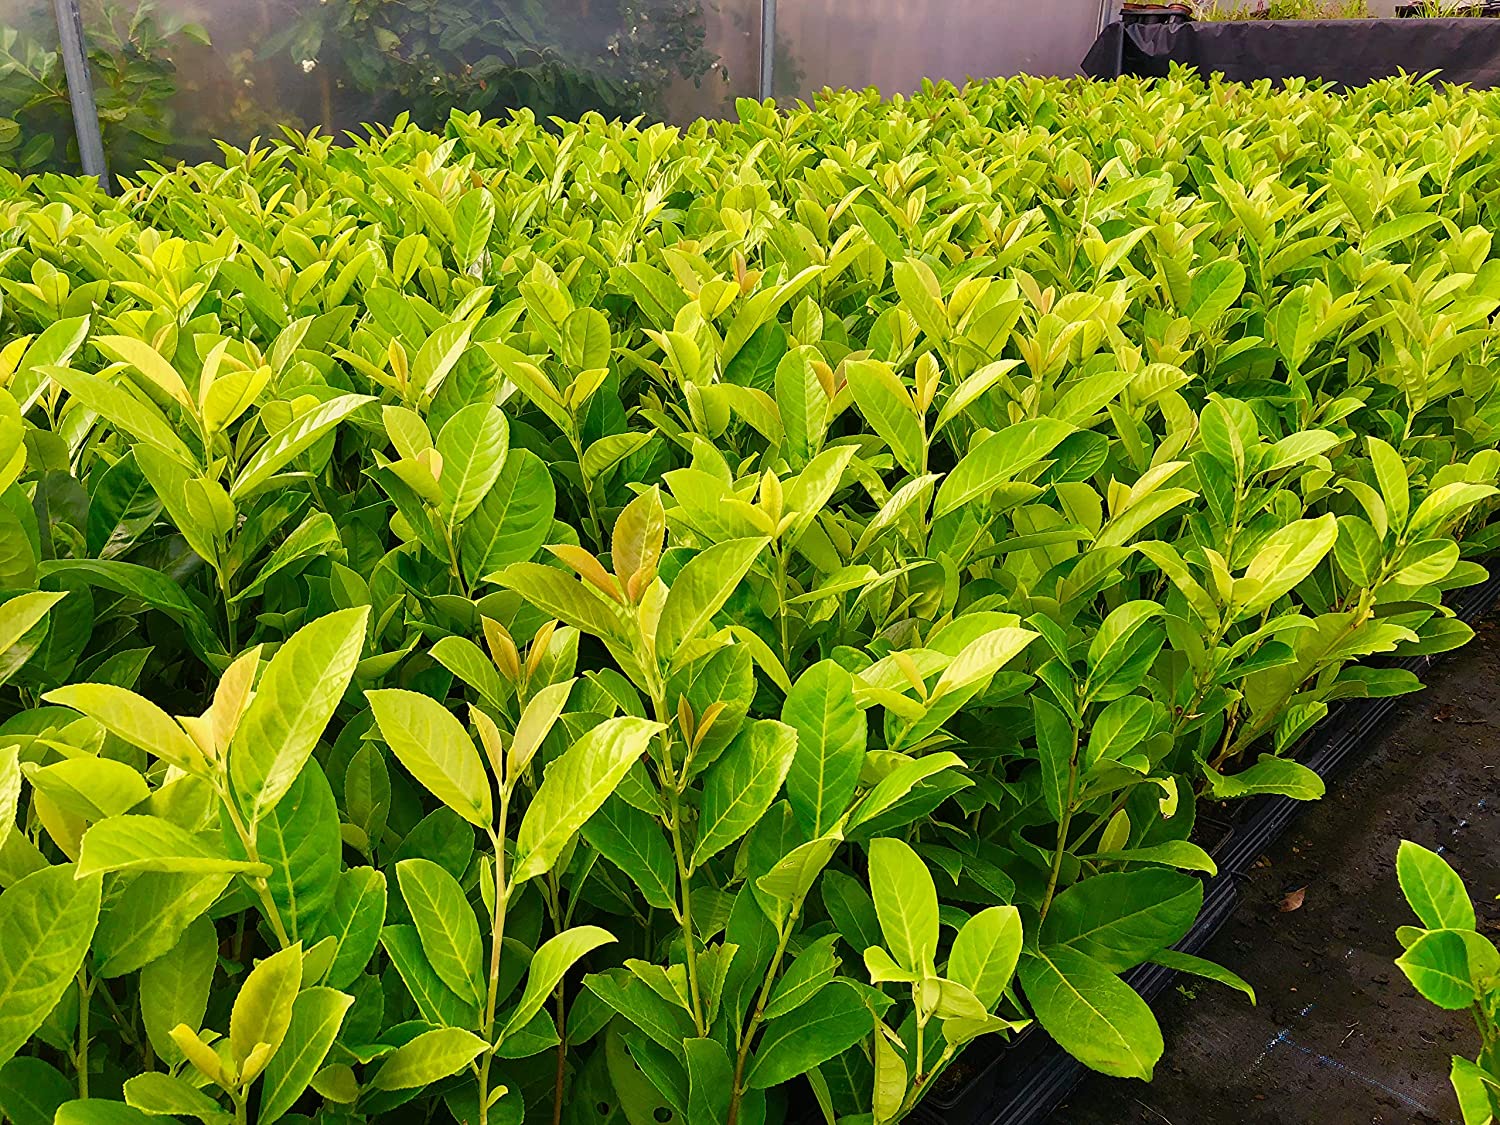 60× (35-50cm) tall Cherry Laurel Hedging  Strong Evergreen Plants Supplied Potted Not Bareroot